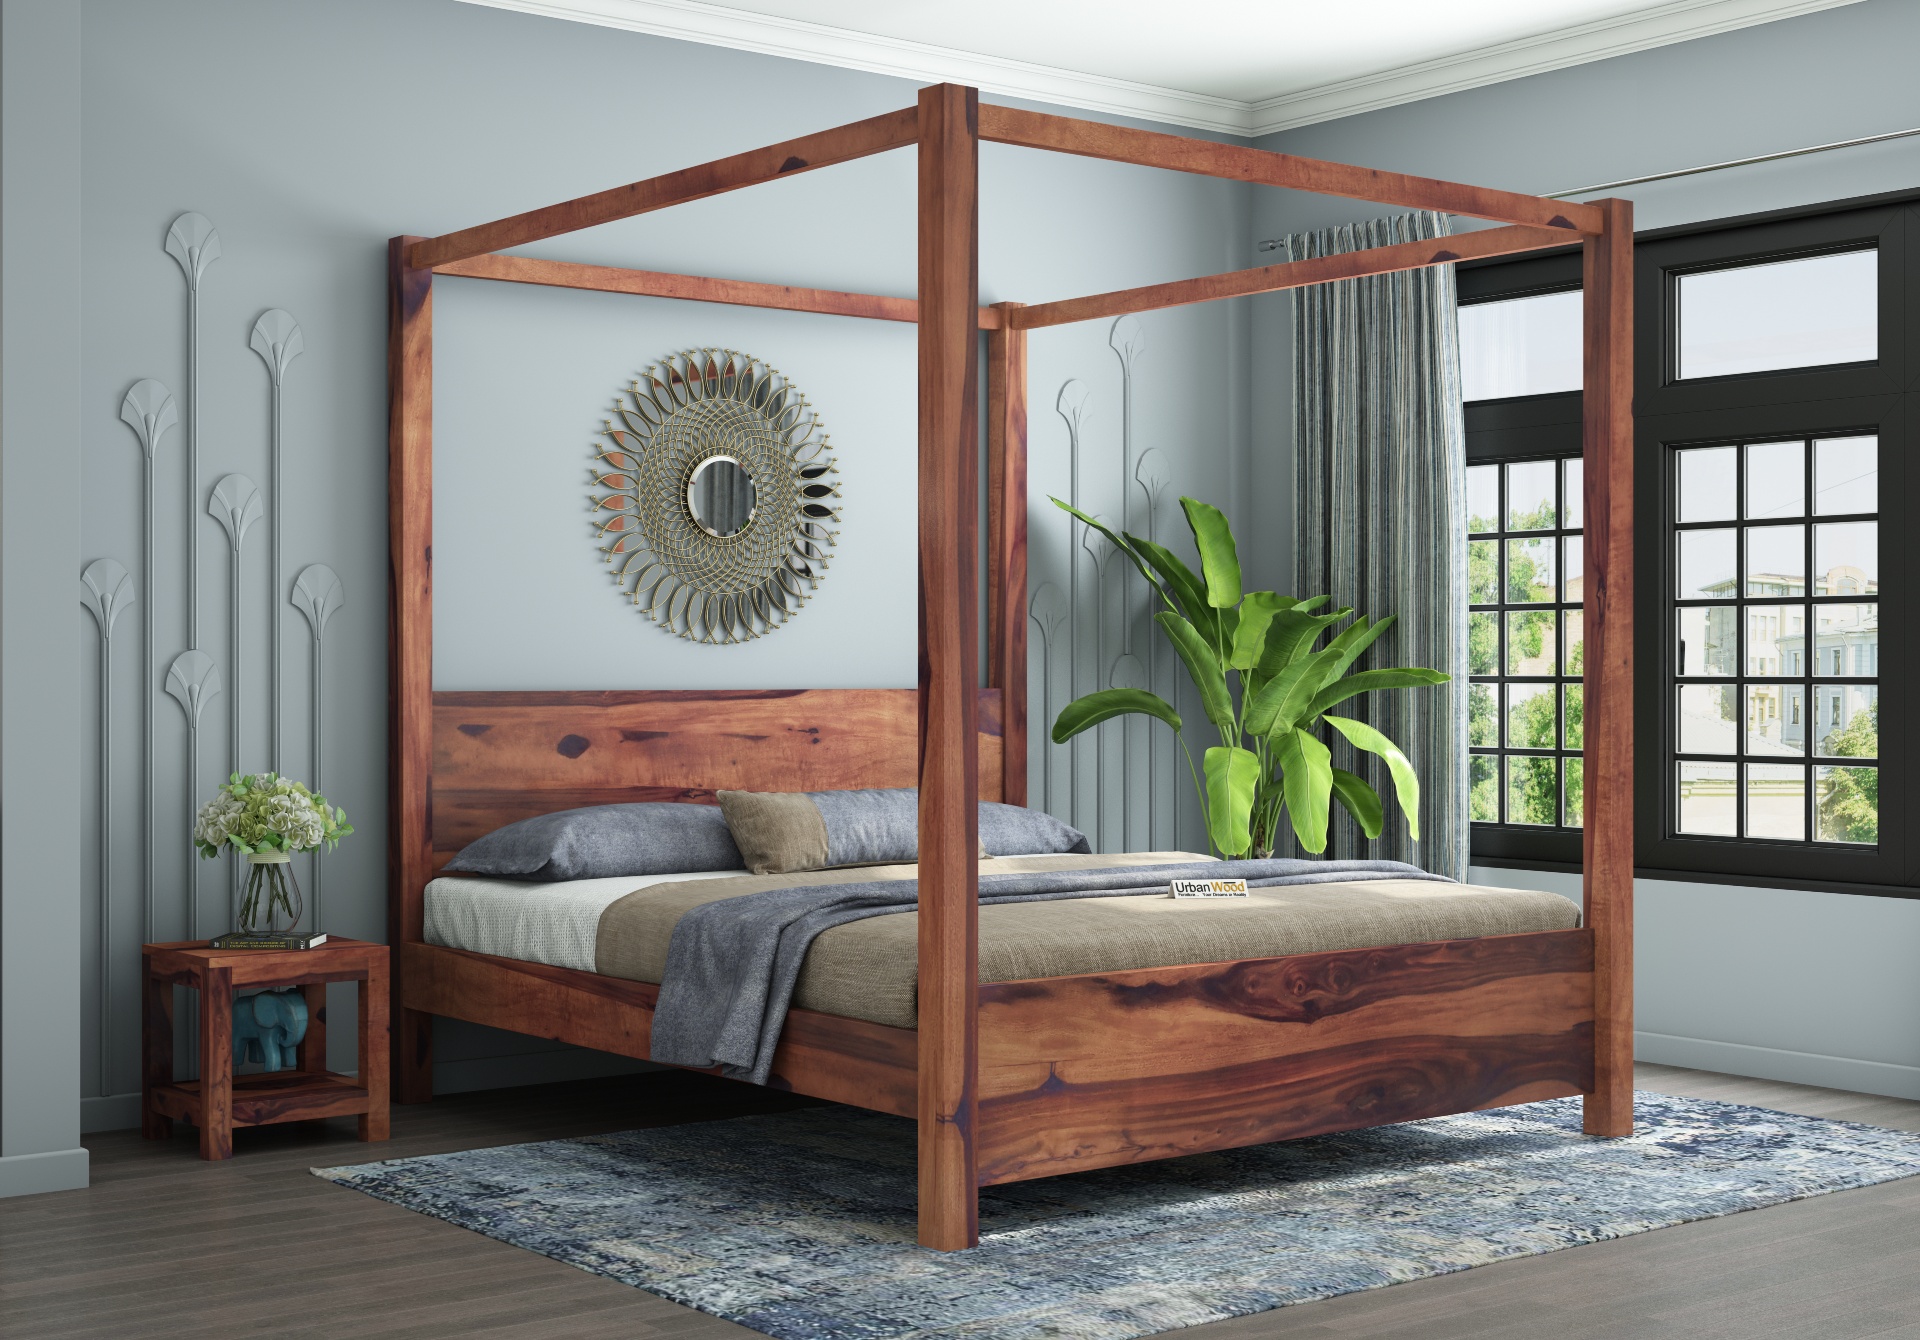 Sigma Poster Bed (Queen Size, Teak Finish)